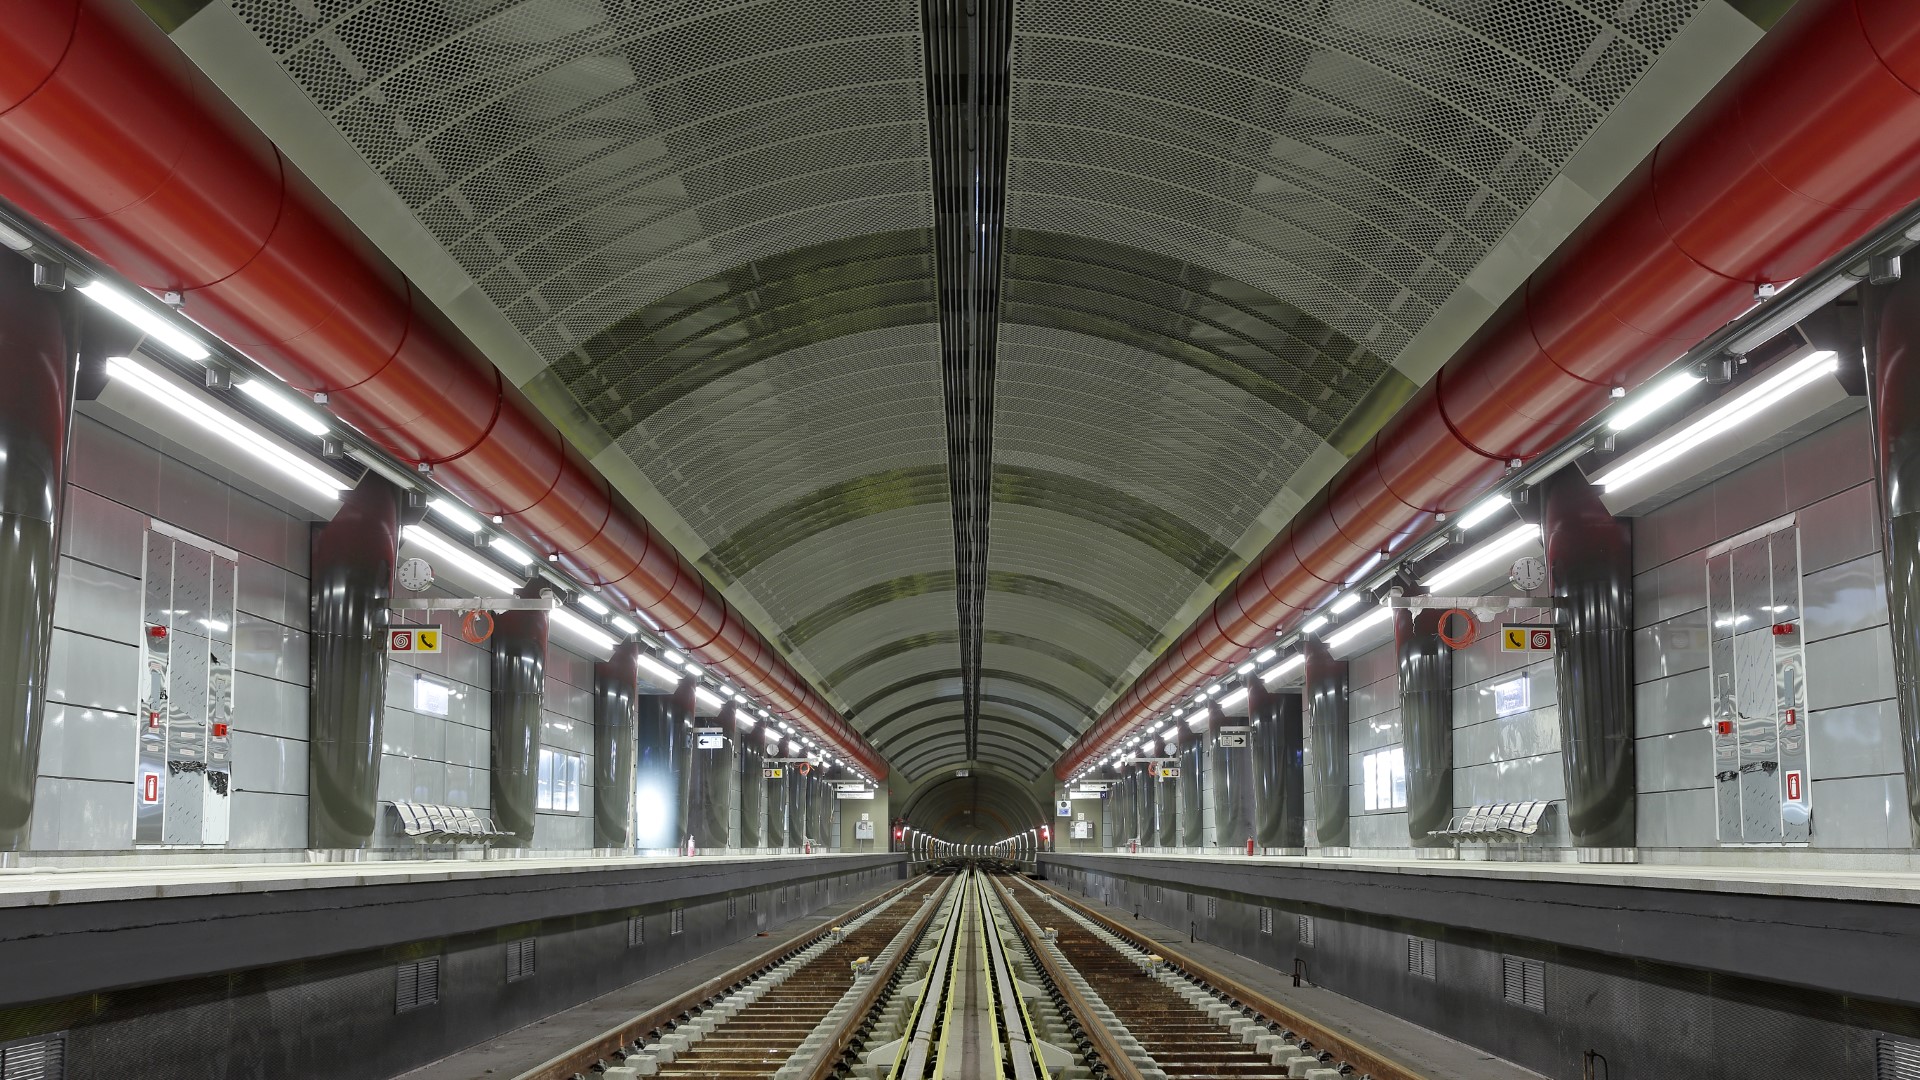 Extension of Line 2 of Athens metro announced